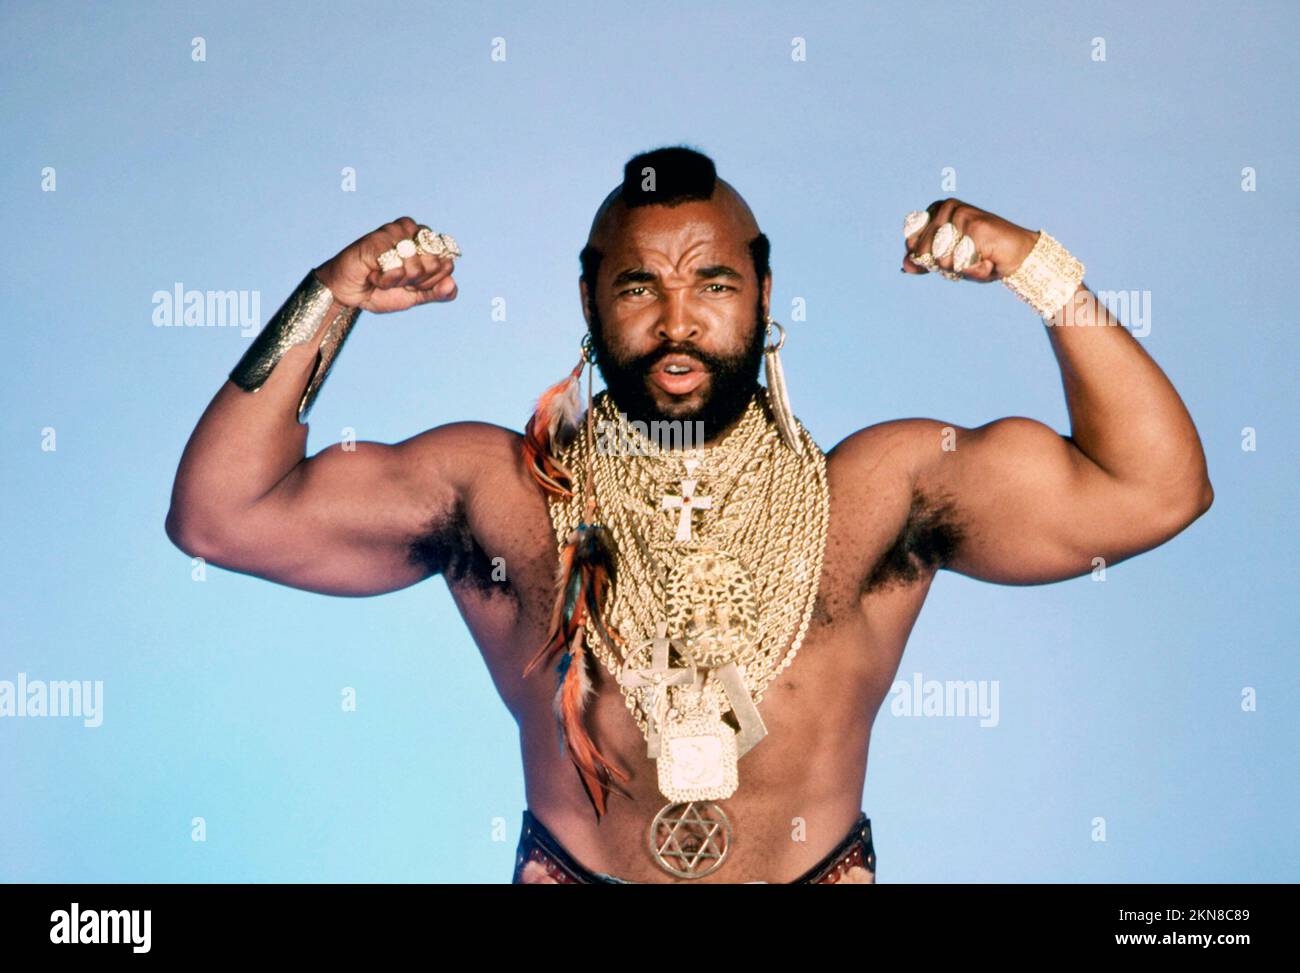 MR. T in THE A-TEAM (1983), directed by STEPHEN J. CANNELL and FRANK LUPO. Credit: STEPHEN J. CANNELL PRODUCTIONS/UNIVERSAL TV / Album Stock Photo